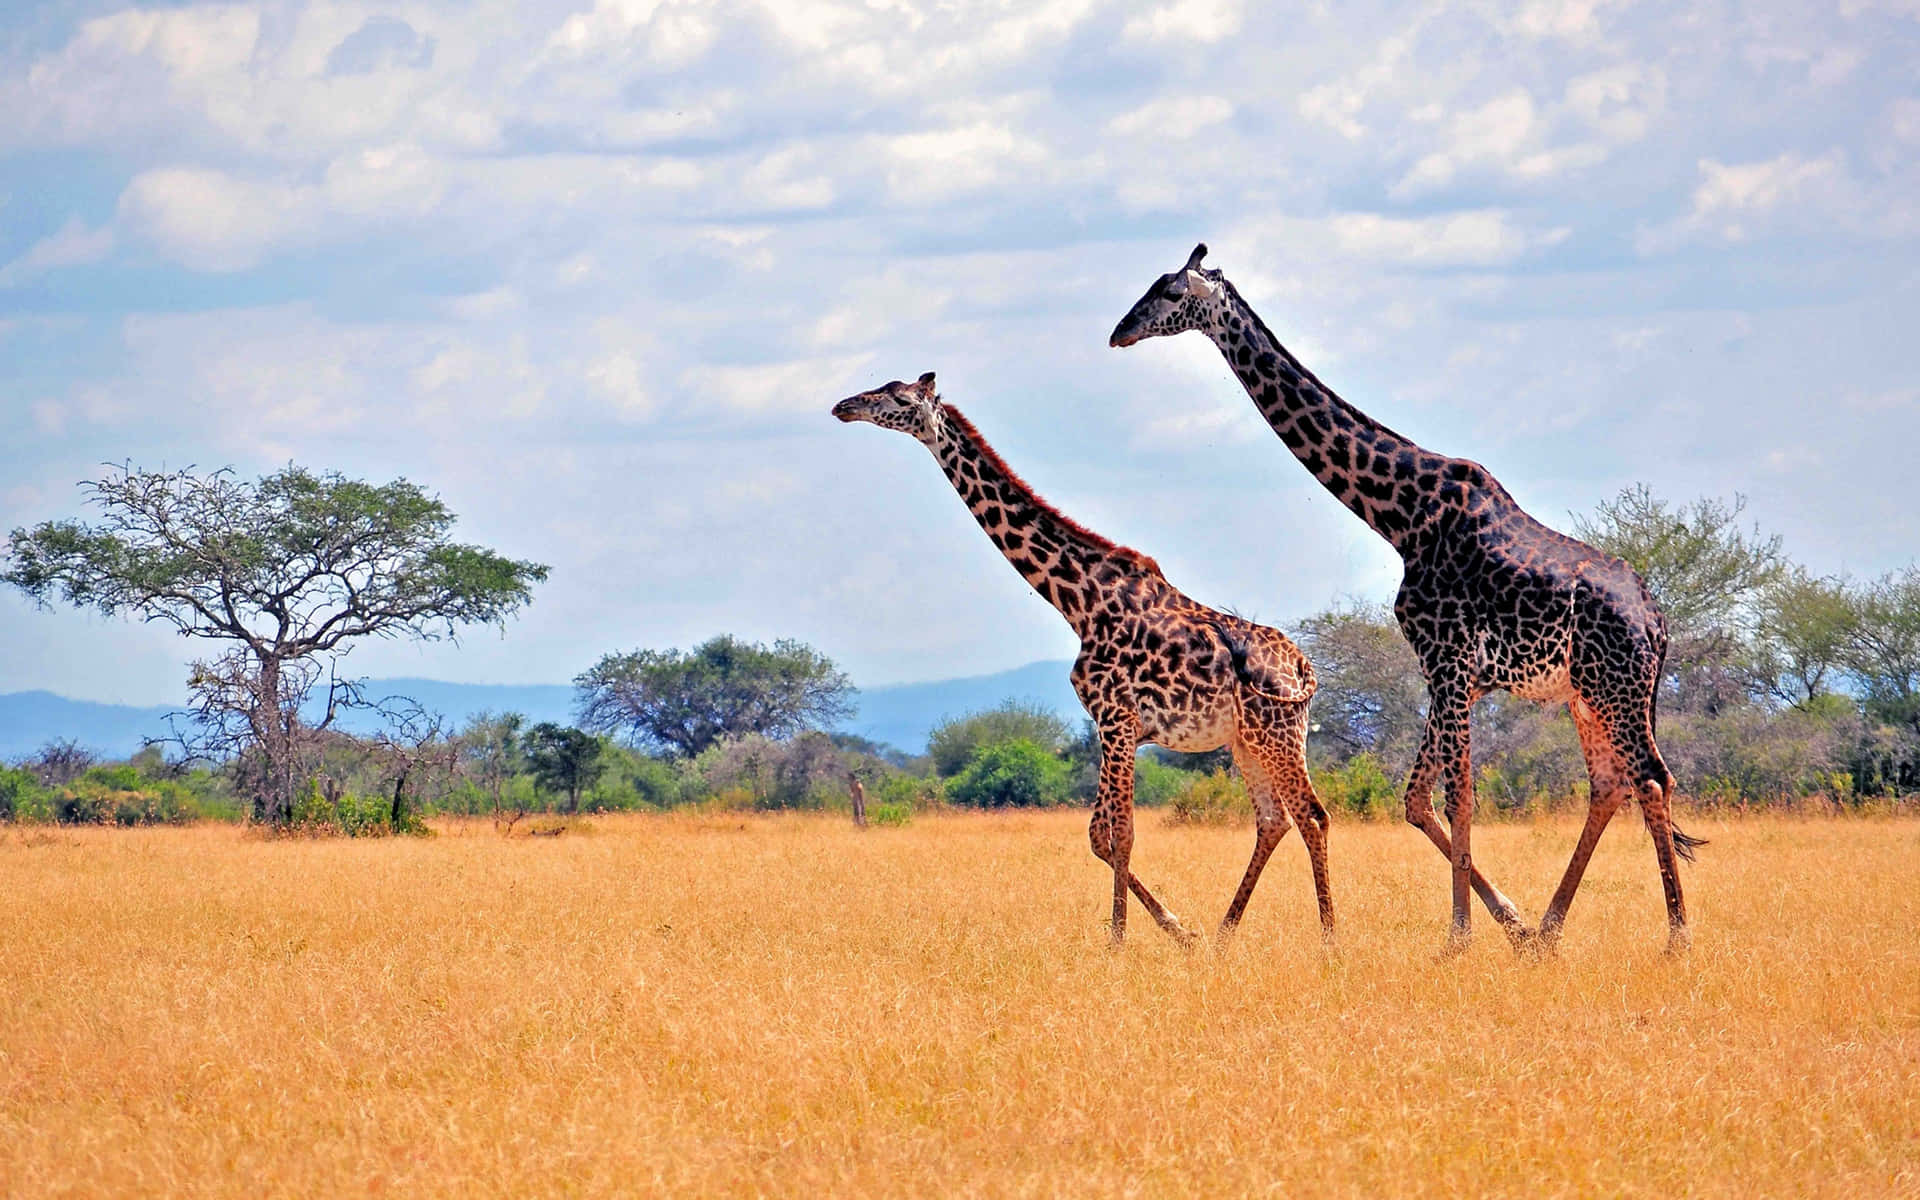 Take in the breathtaking views while on safari in Africa.